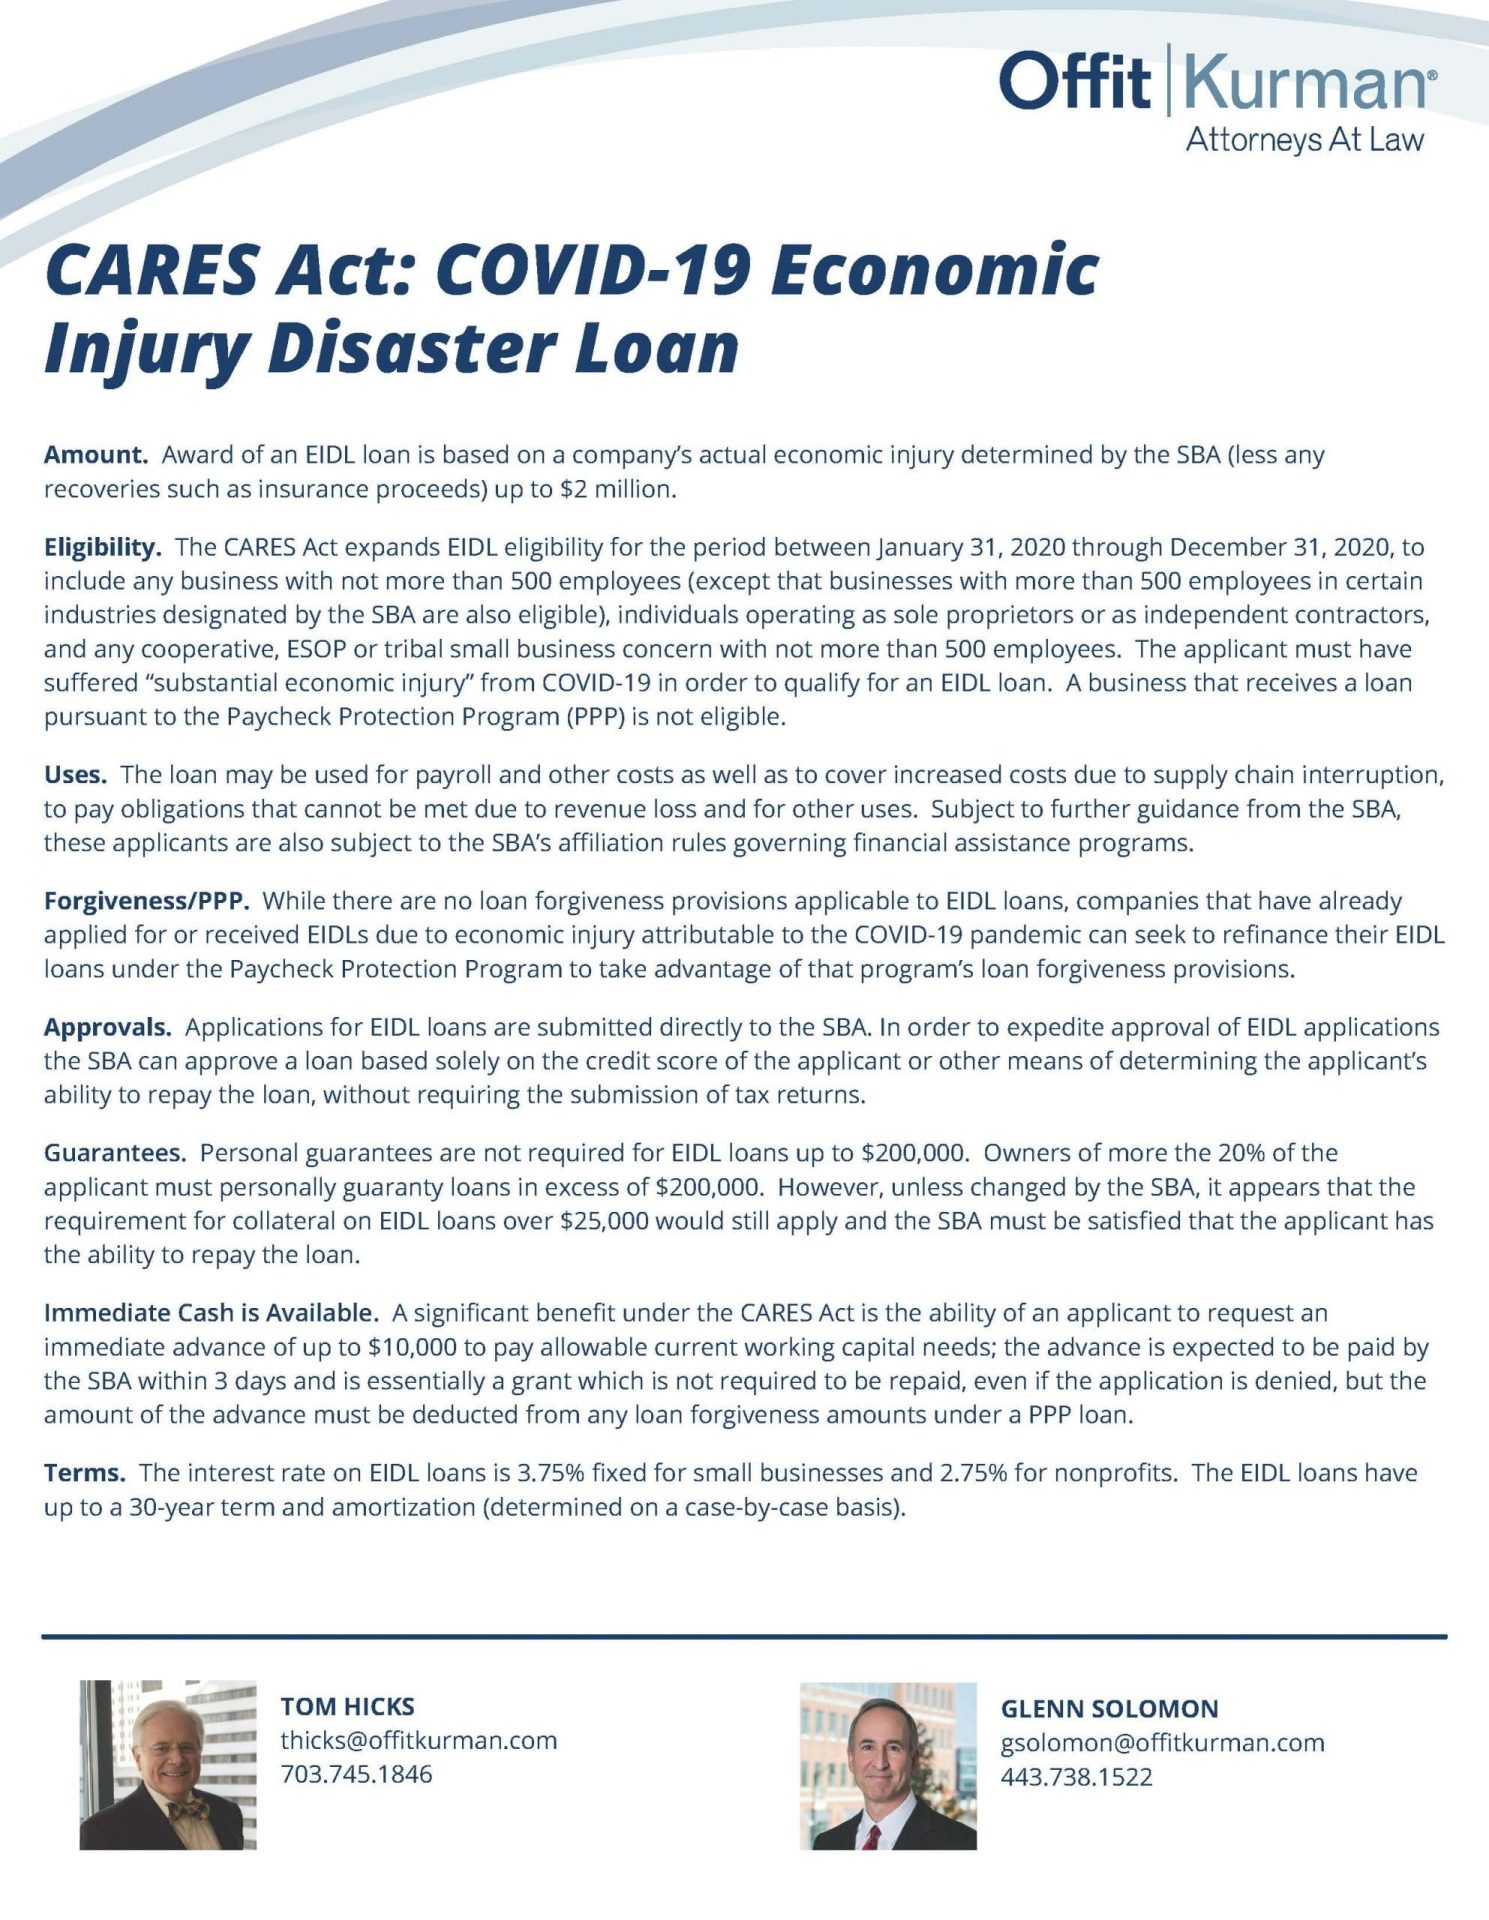 CARES Act- Covid-19 Economic Injury Disaster Loan